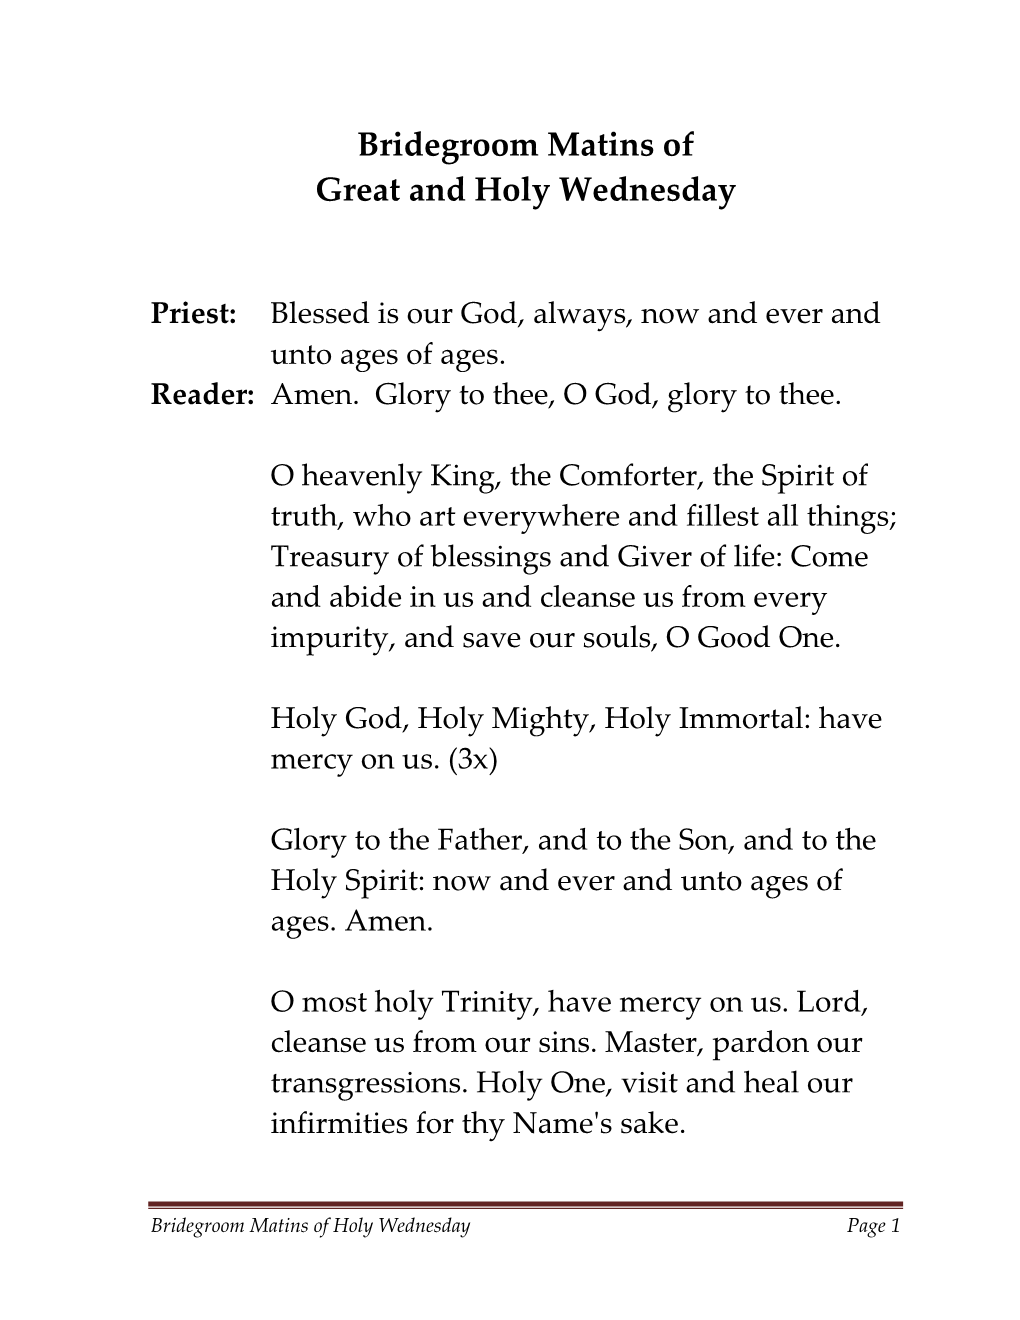 Bridegroom Matins of Great and Holy Wednesday